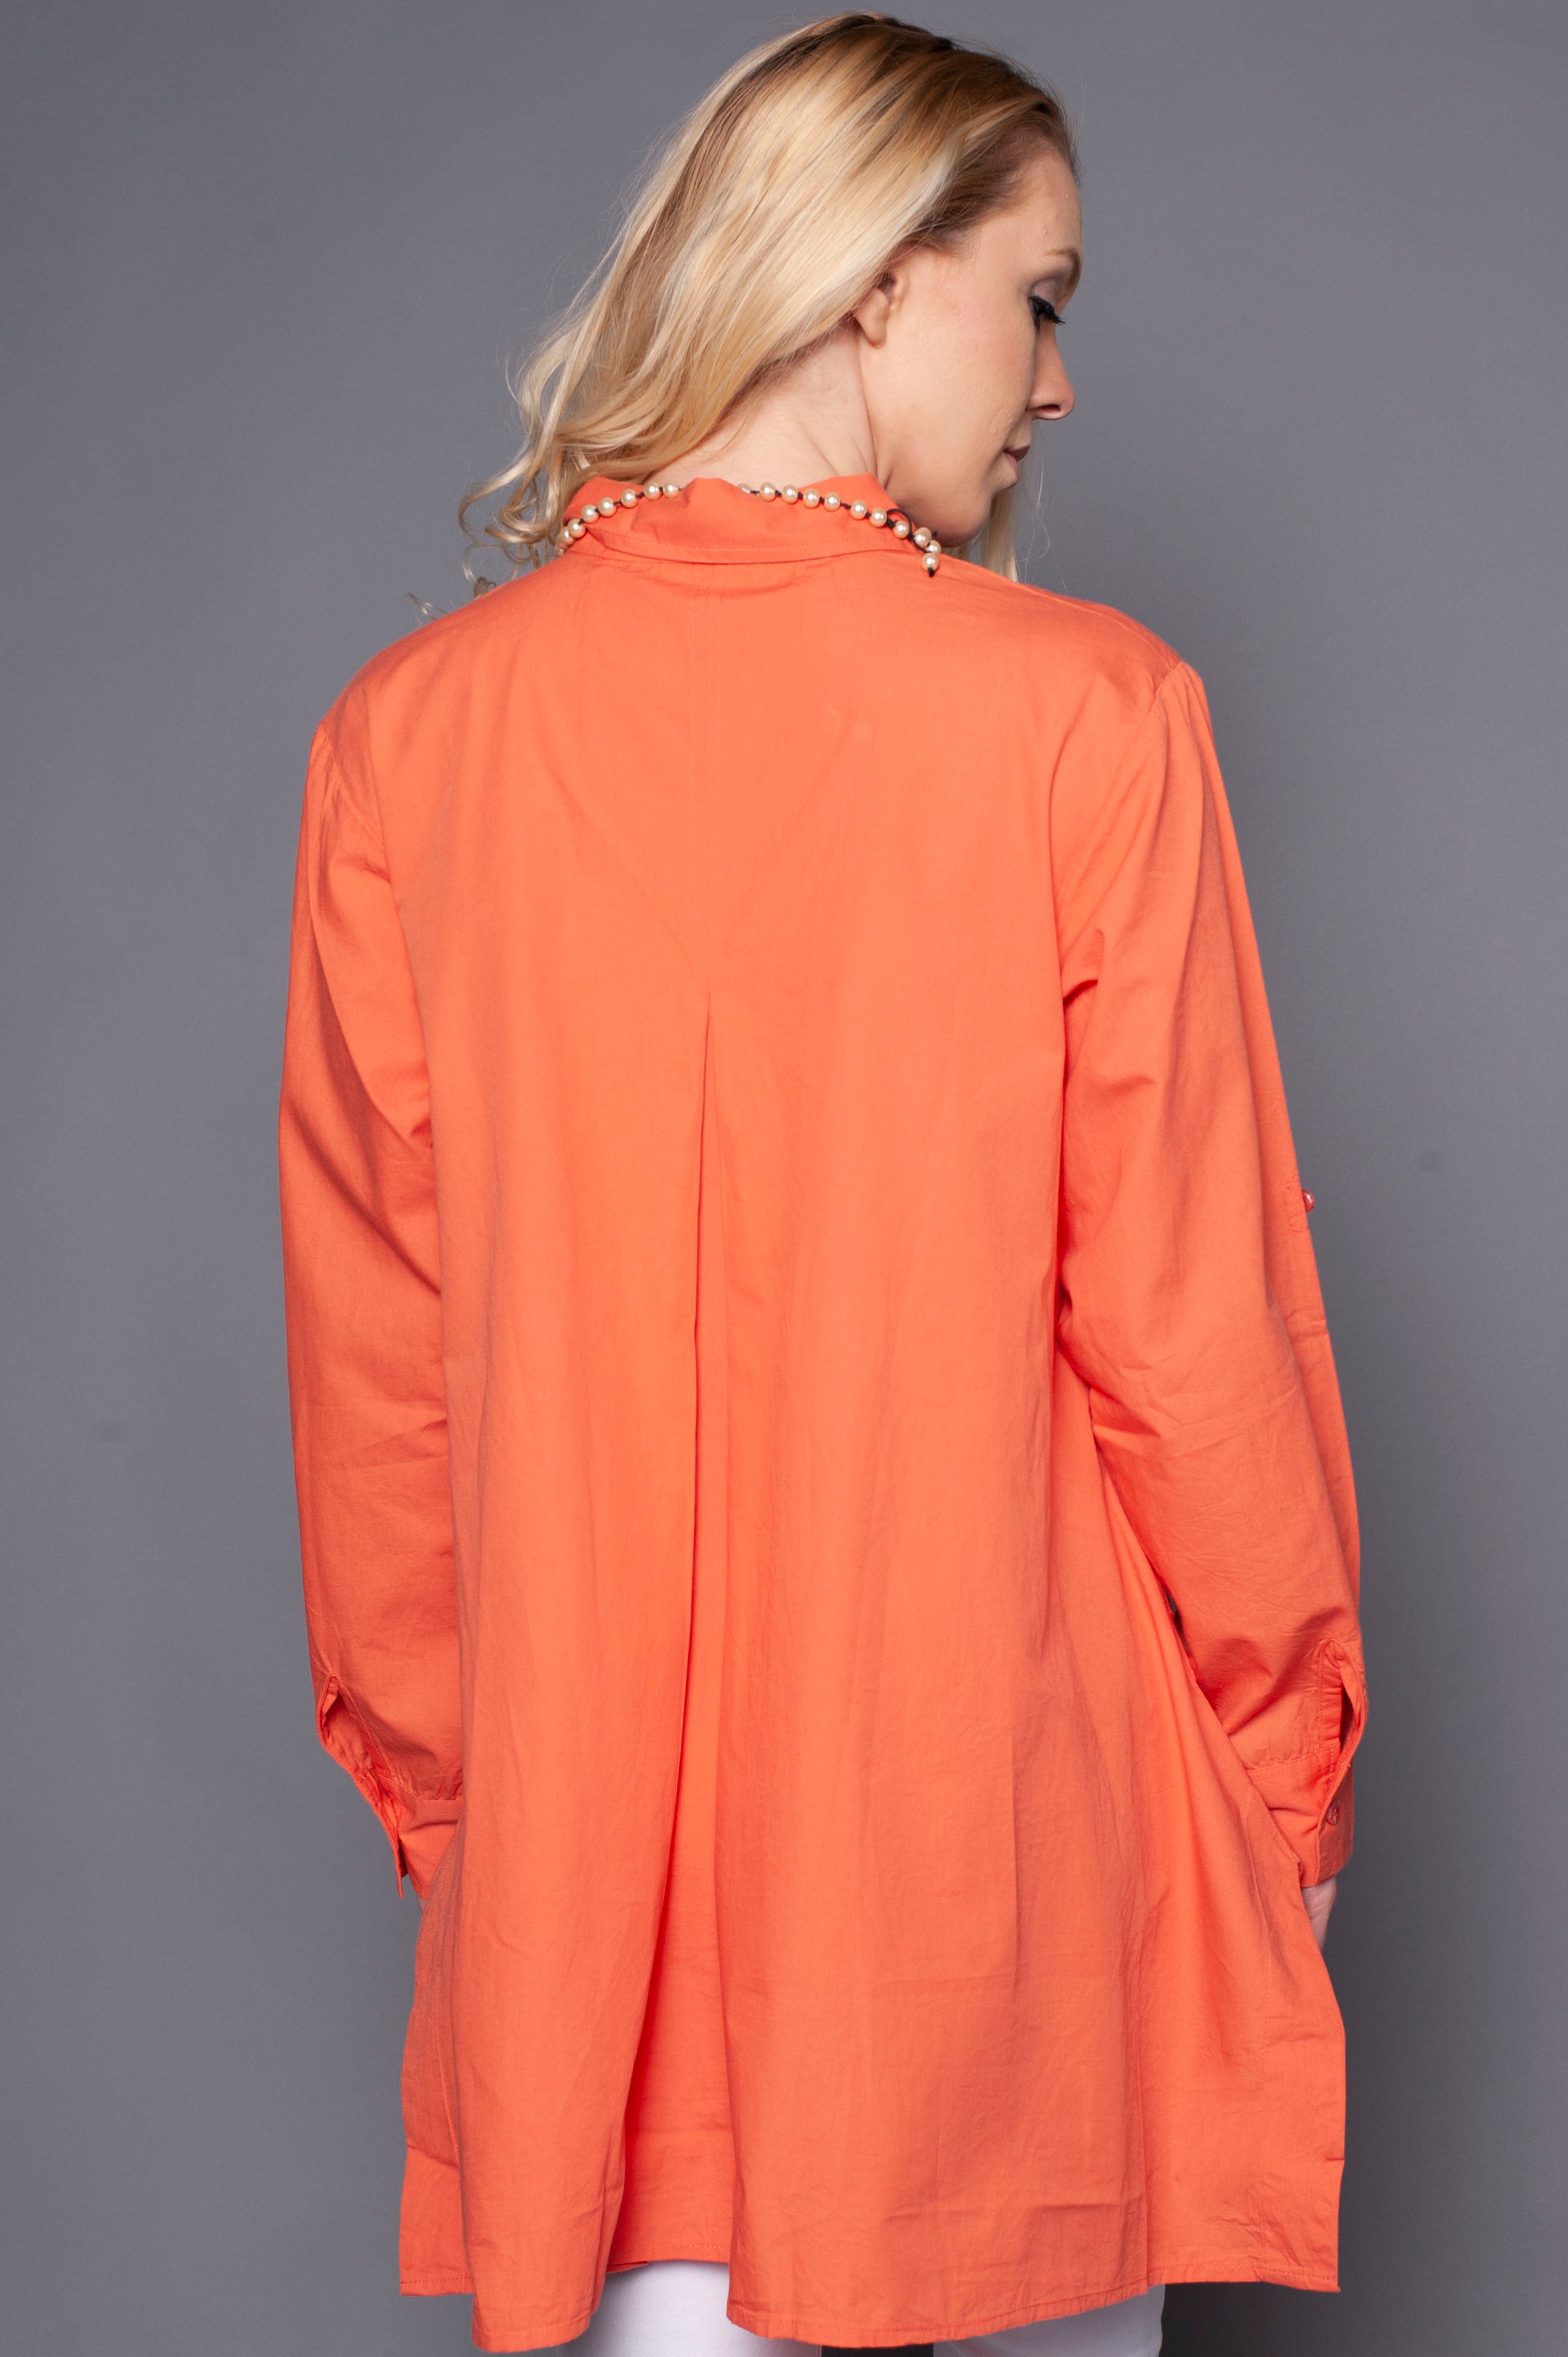 Boxy Shirt with Flare in Coral